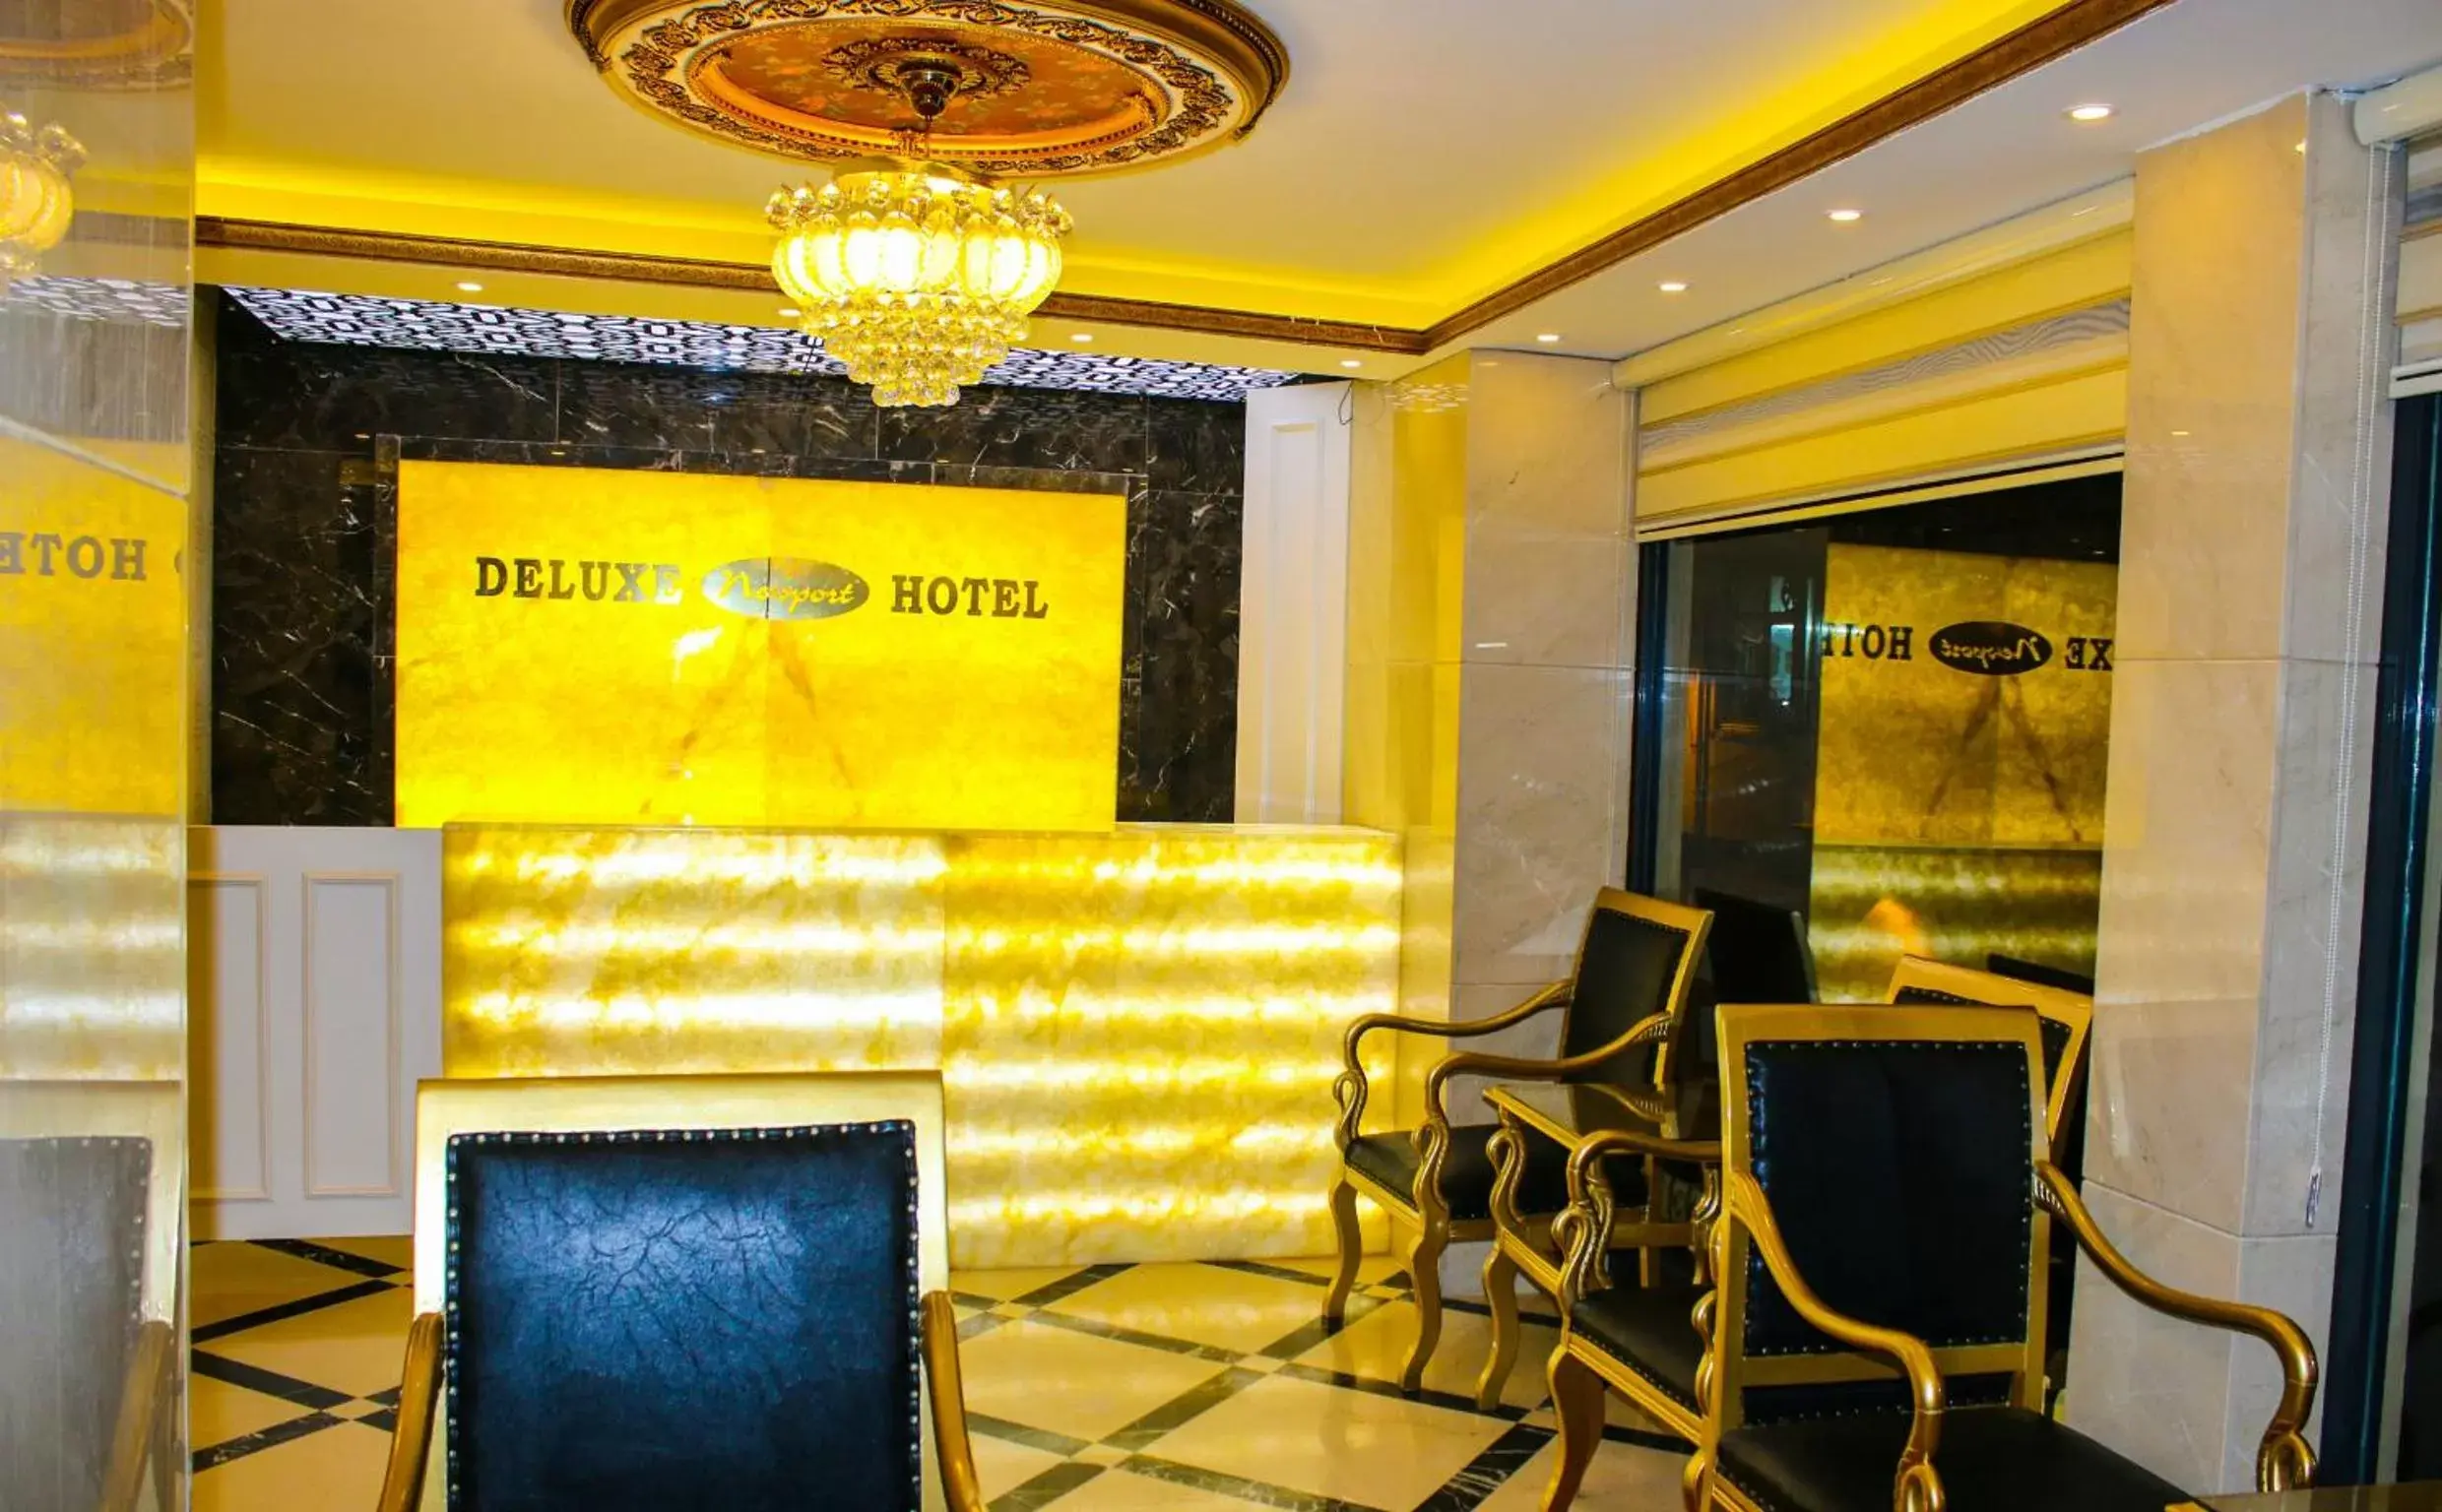 Lobby or reception in Deluxe Newport Hotel